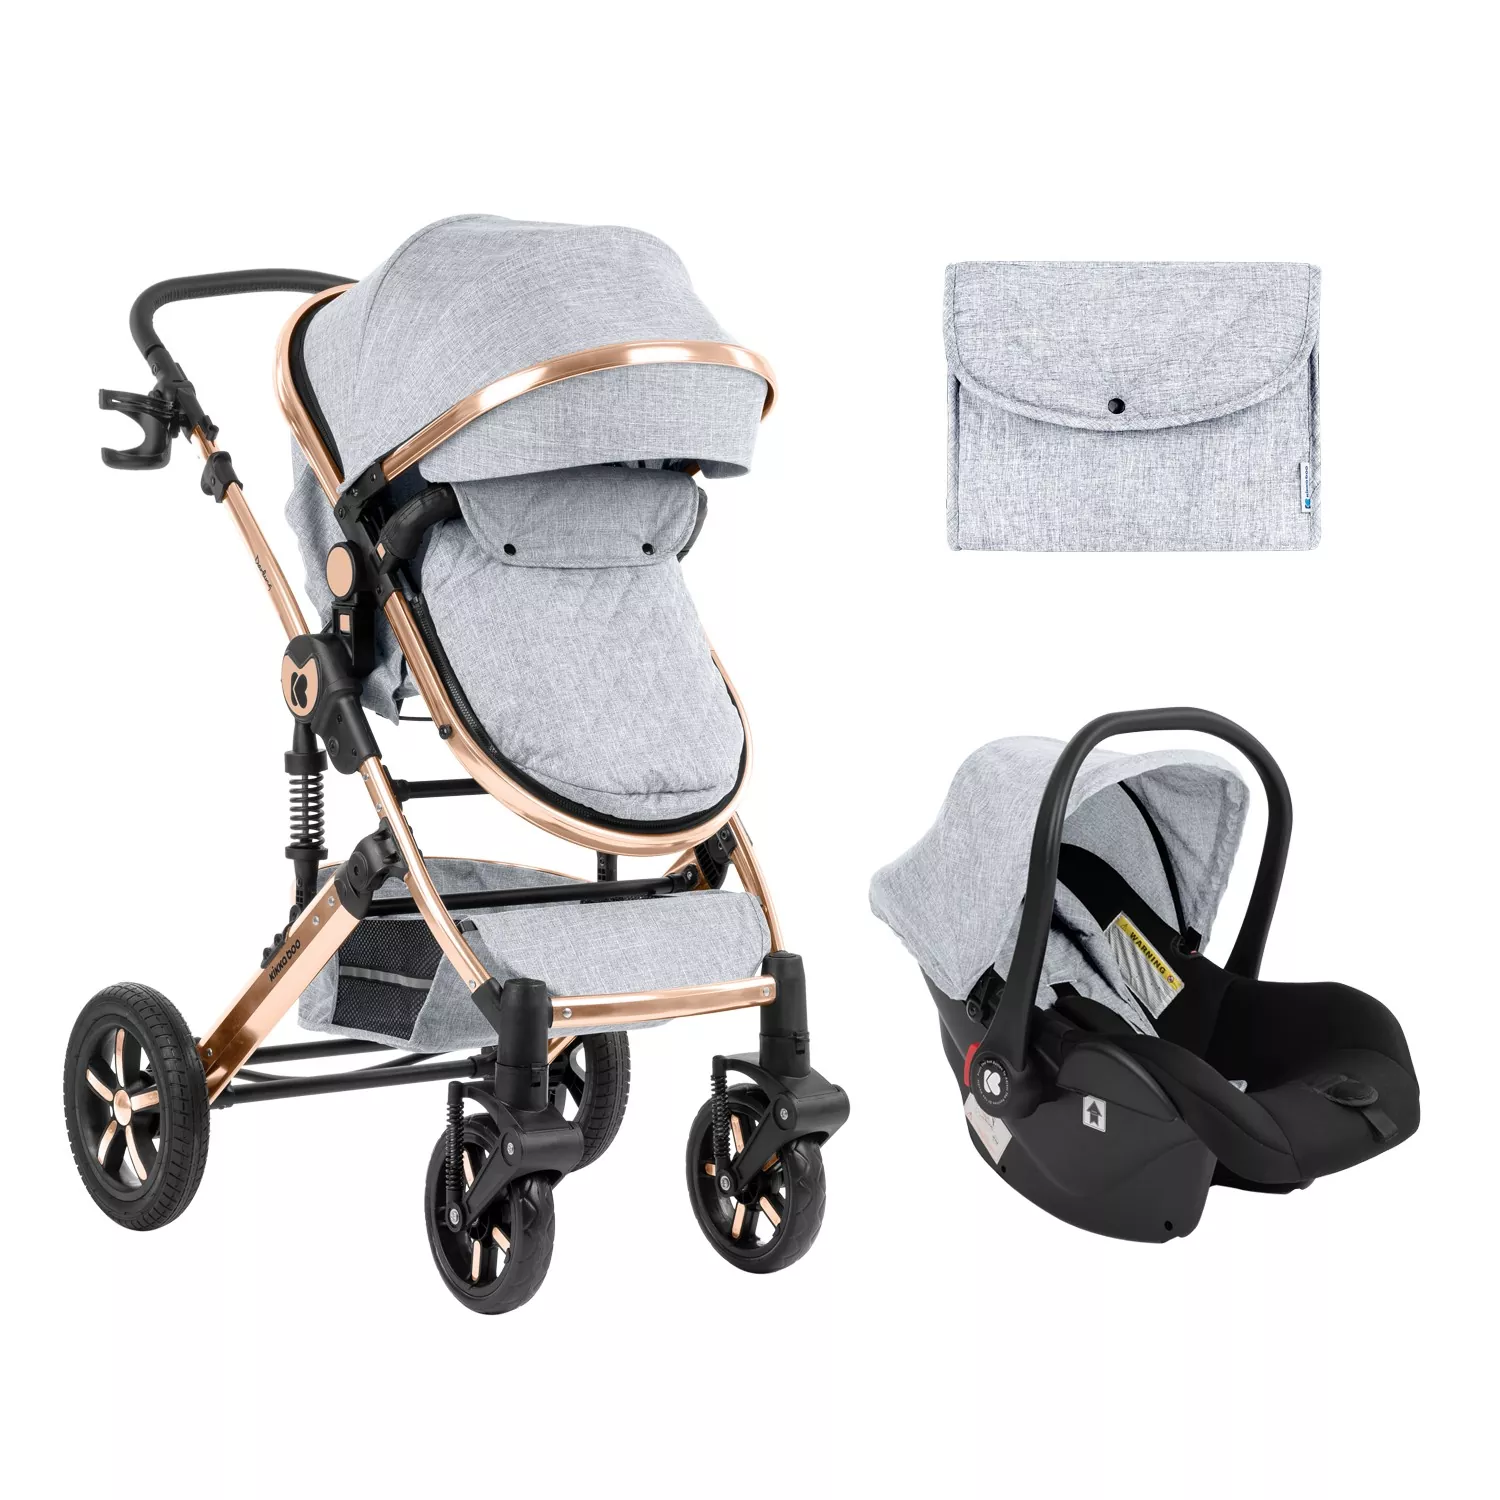 Coche Darling 3 in 1 Transformable Gris claro